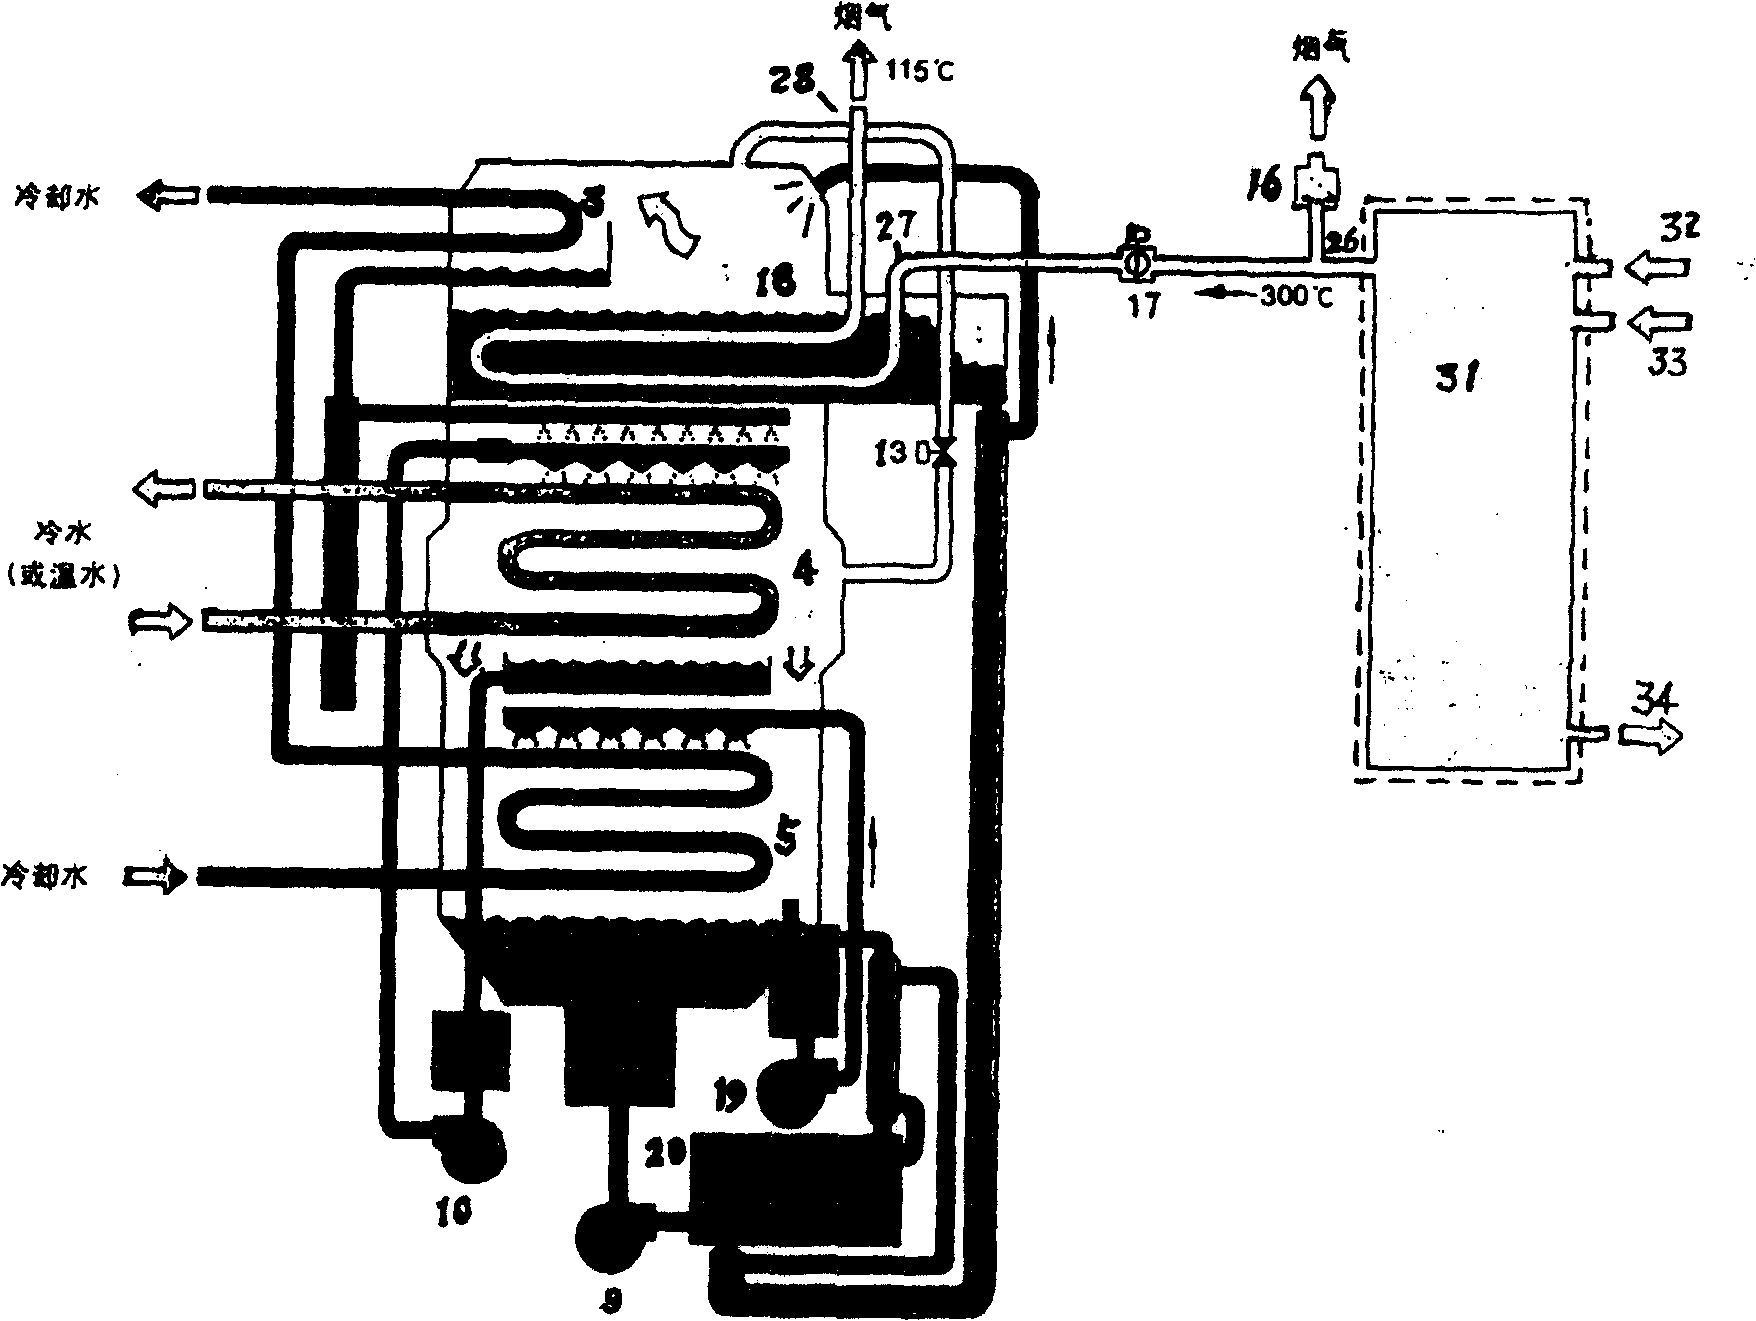 Apparatus for refrigeration or pyrogenicity or sanitary hot water using generator exhaust or residual heat